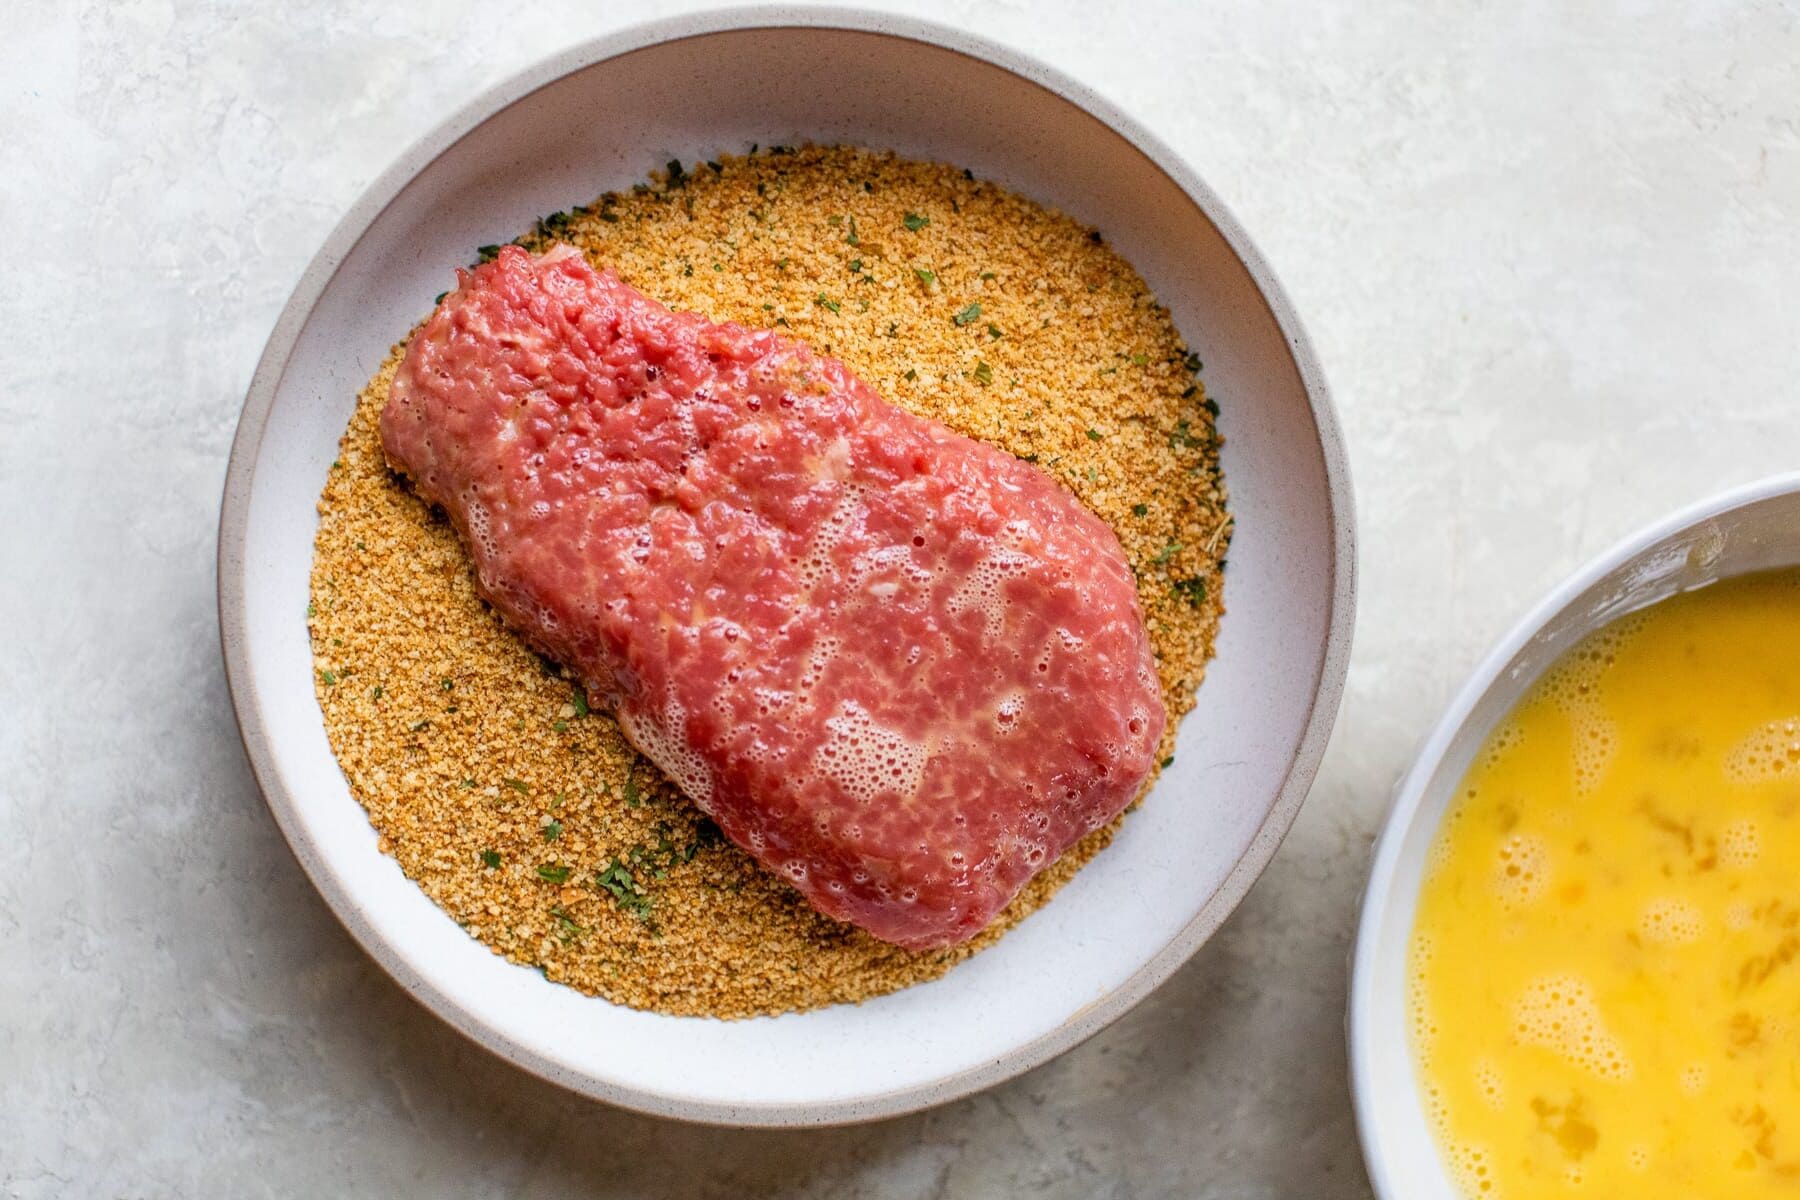 cubed steak in egg and breadcrumbs